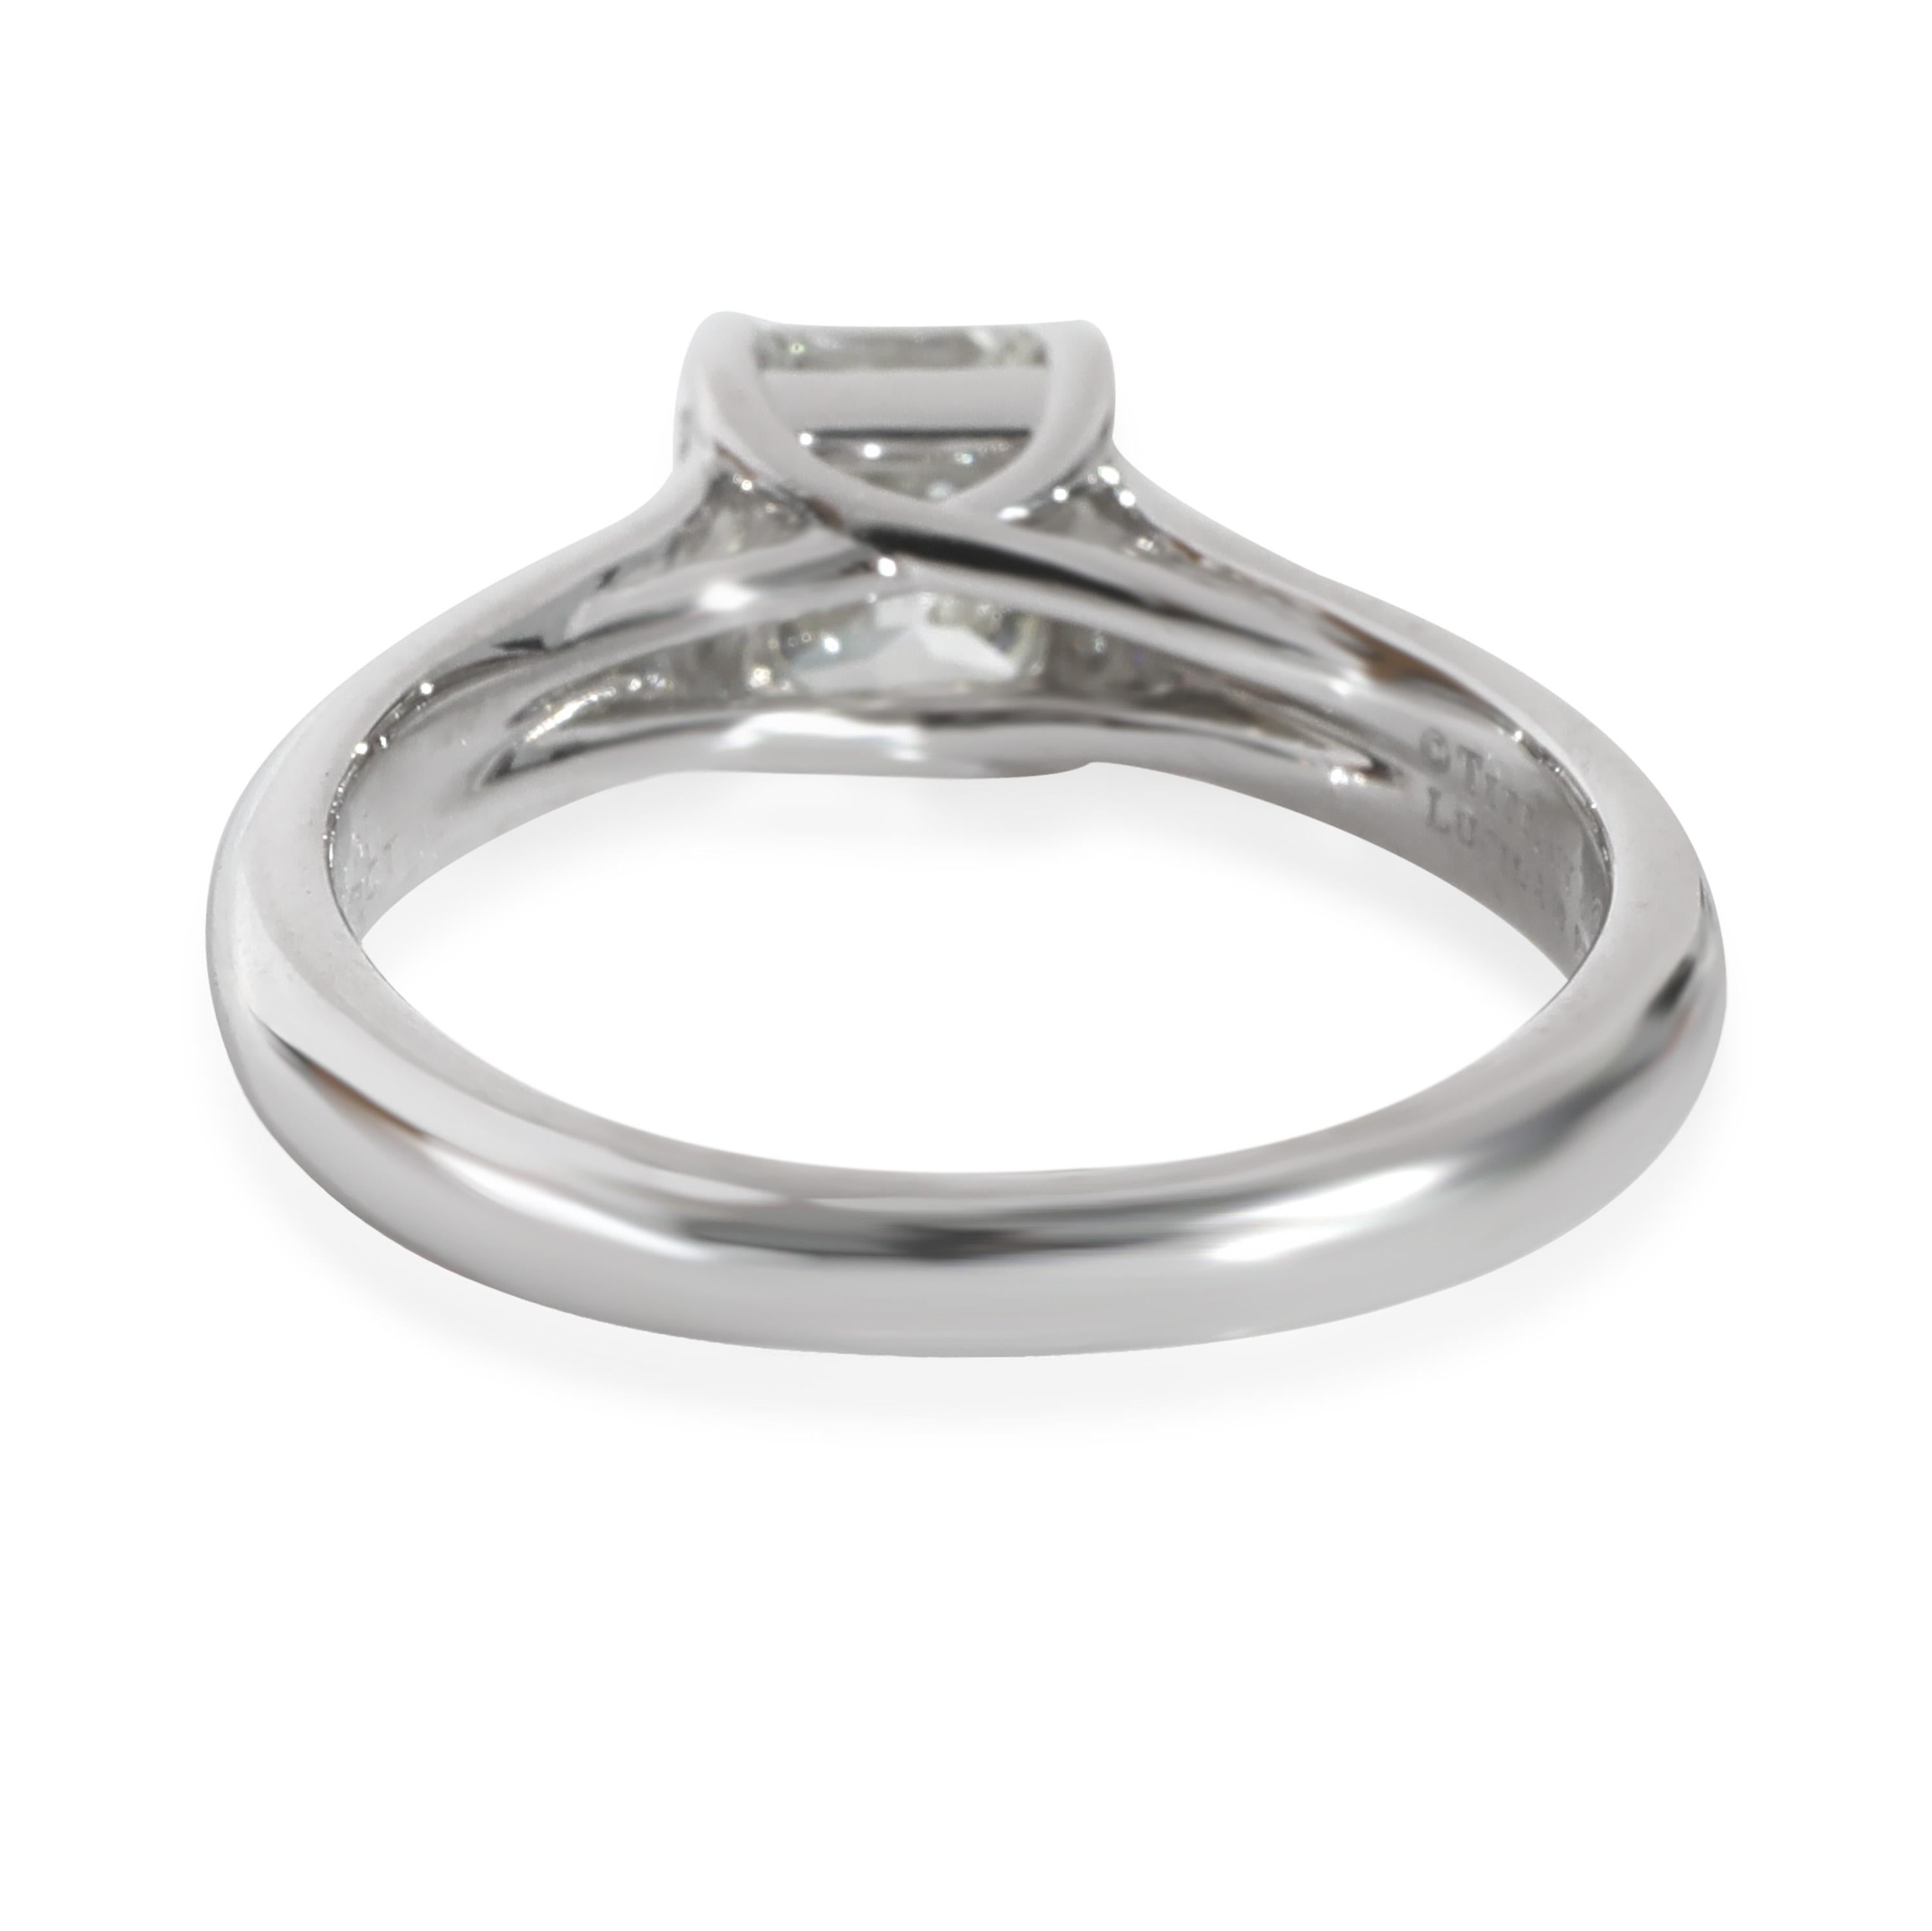 Tiffany & Co. Lucida Diamond Engagement Ring in Platinum I VVS2 1.07 CTW

PRIMARY DETAILS
SKU: 130585
Listing Title: Tiffany & Co. Lucida Diamond Engagement Ring in Platinum I VVS2 1.07 CTW
Condition Description: Tiffany & Co. patented the Lucida